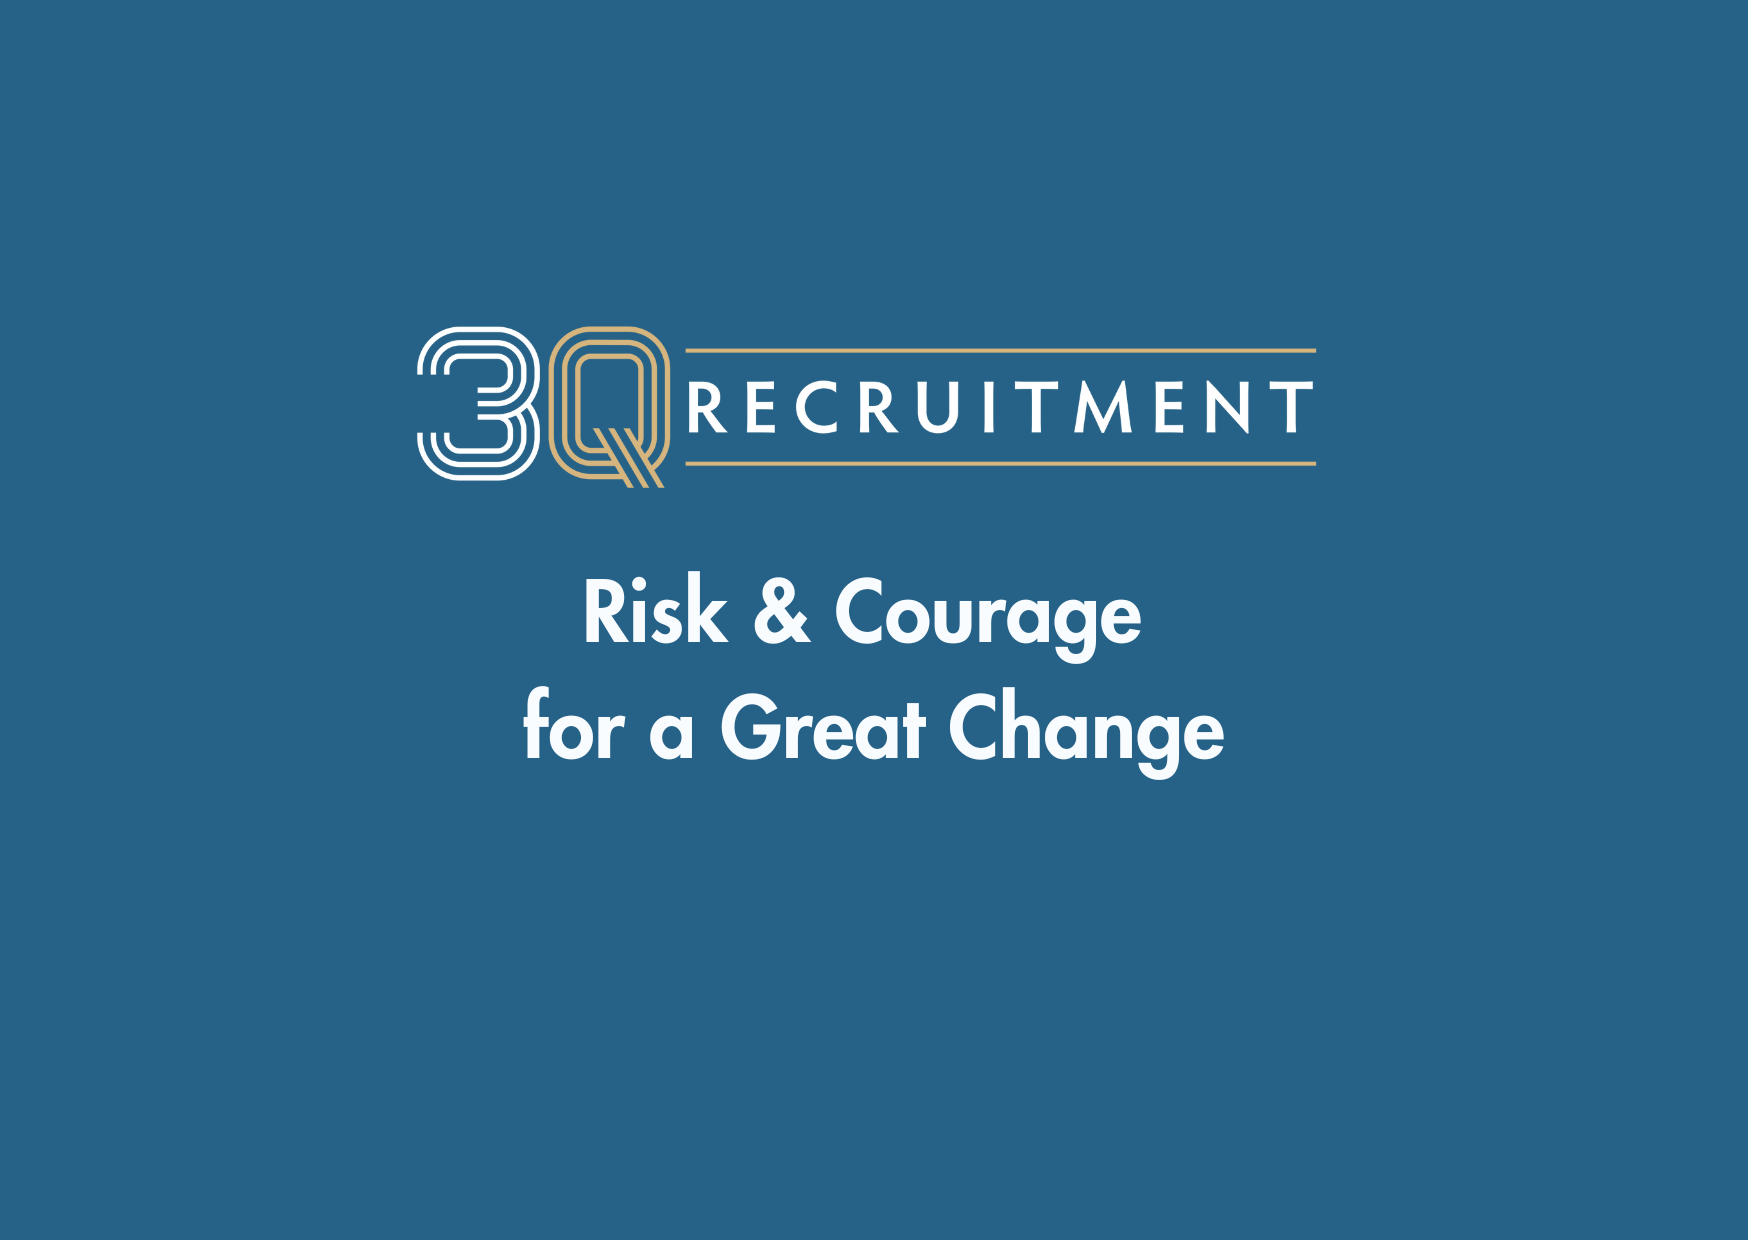 3Q Recruitment Risk & Courage for a Great Change